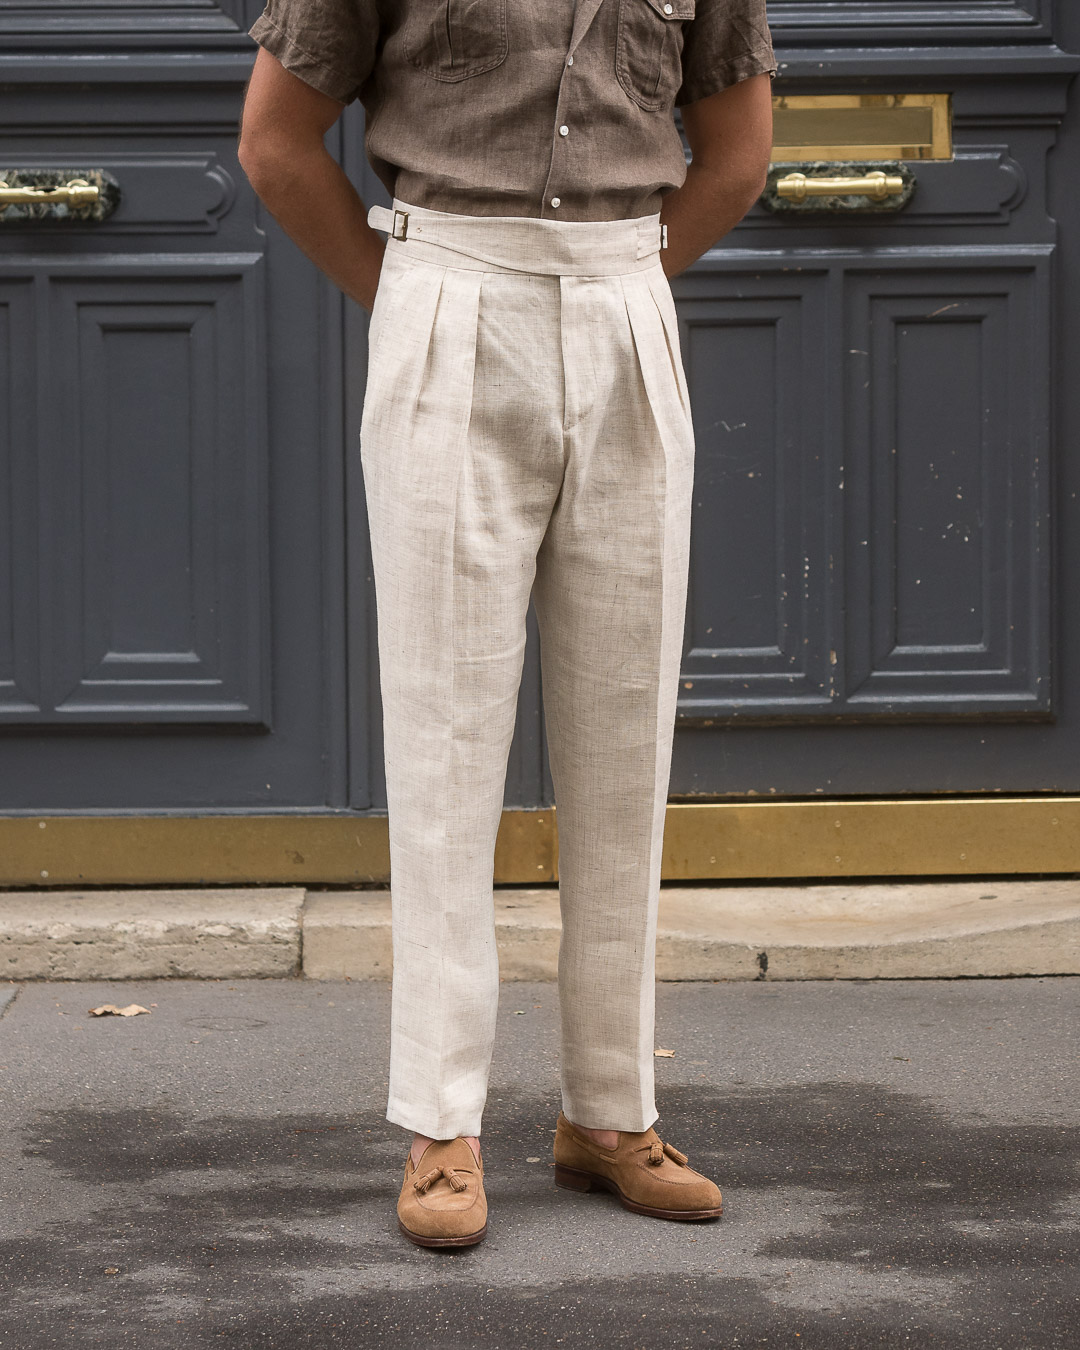 Men's Rubinacci Trousers, Slacks and Chinos from A$679 | Lyst Australia